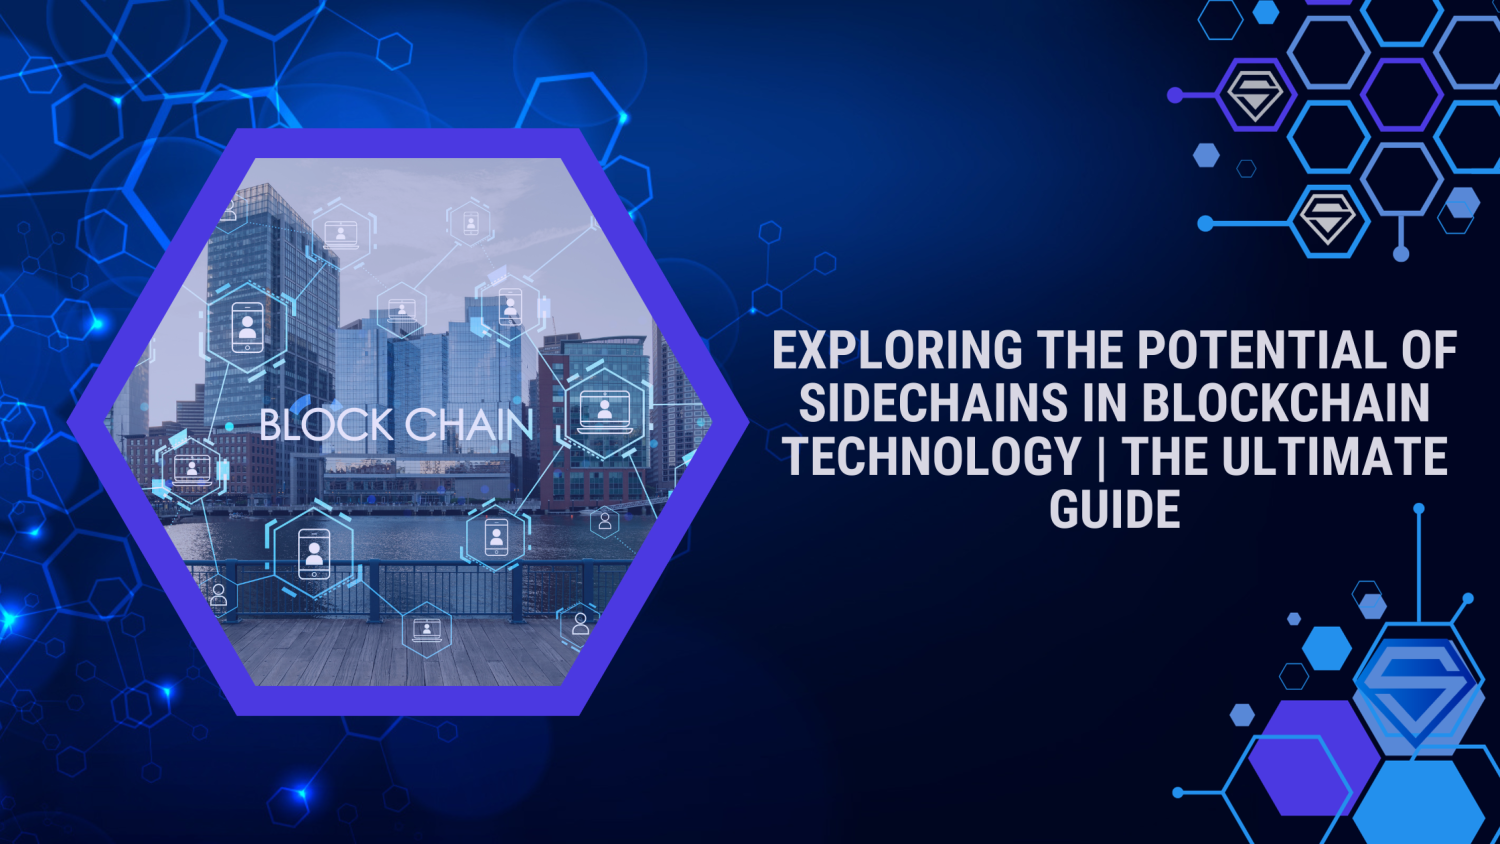 Exploring the Potential of Sidechains in Blockchain Technology | The Ultimate Guide